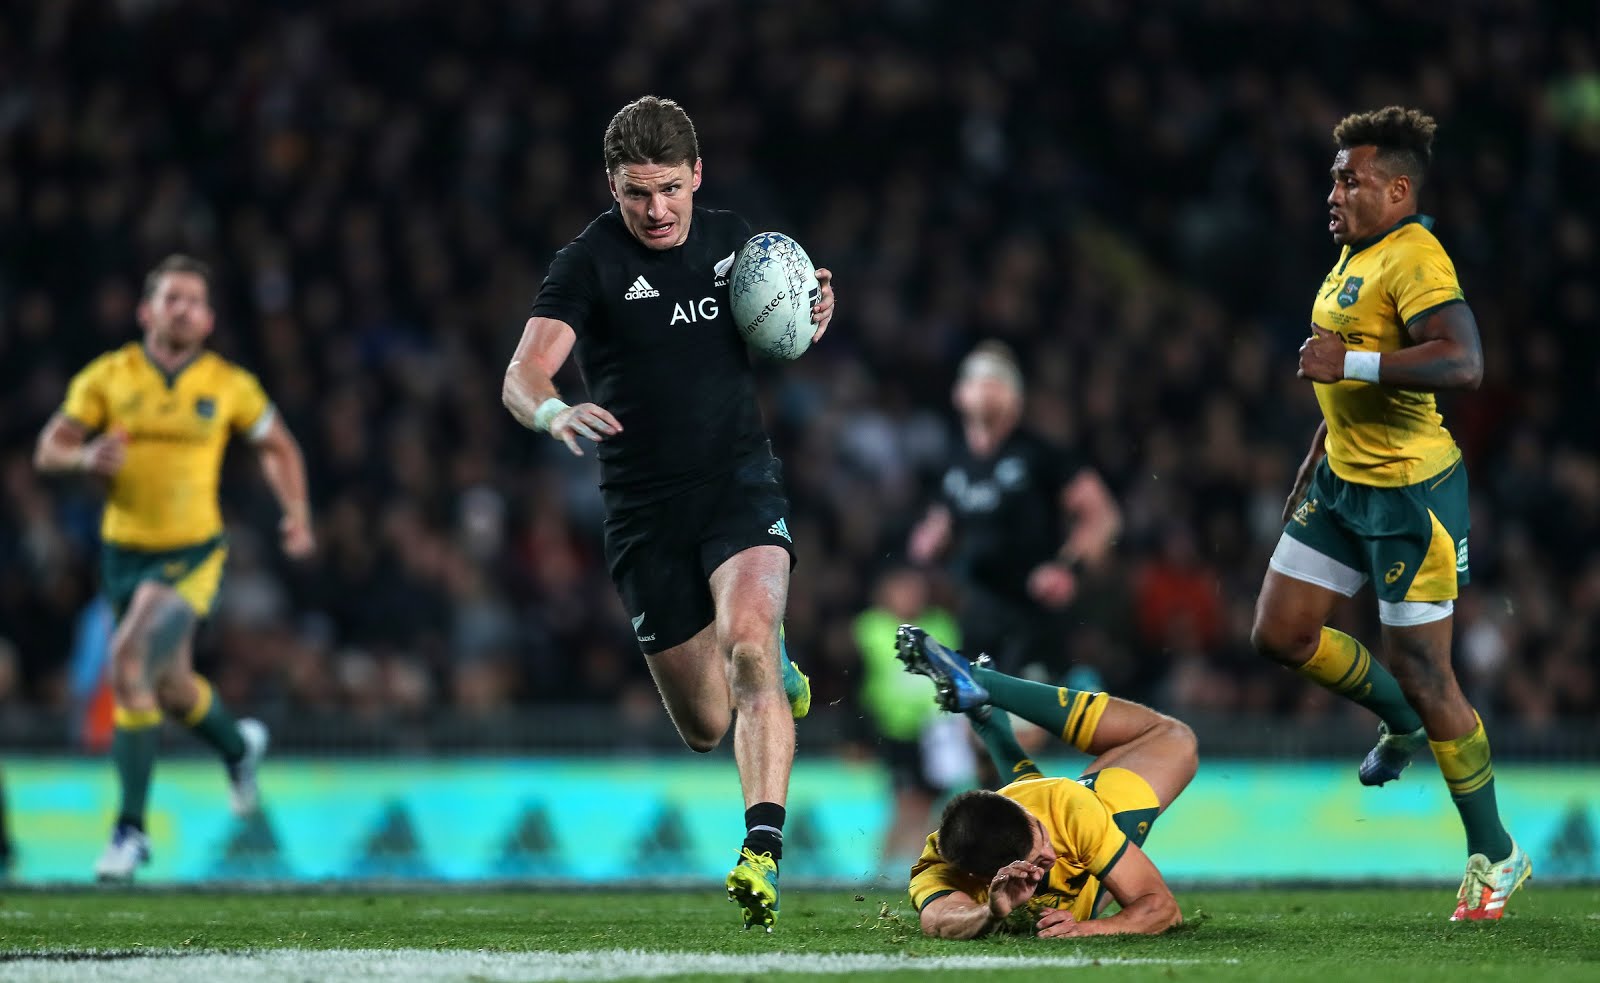 Beauden Barrett in action during the Bledisloe Cup and Rugby Championship rugby match between the New Zealand All Blacks and Australia Wallabies at Eden Park in Auckland, New Zealand on Saturday, 25 August 2018. 